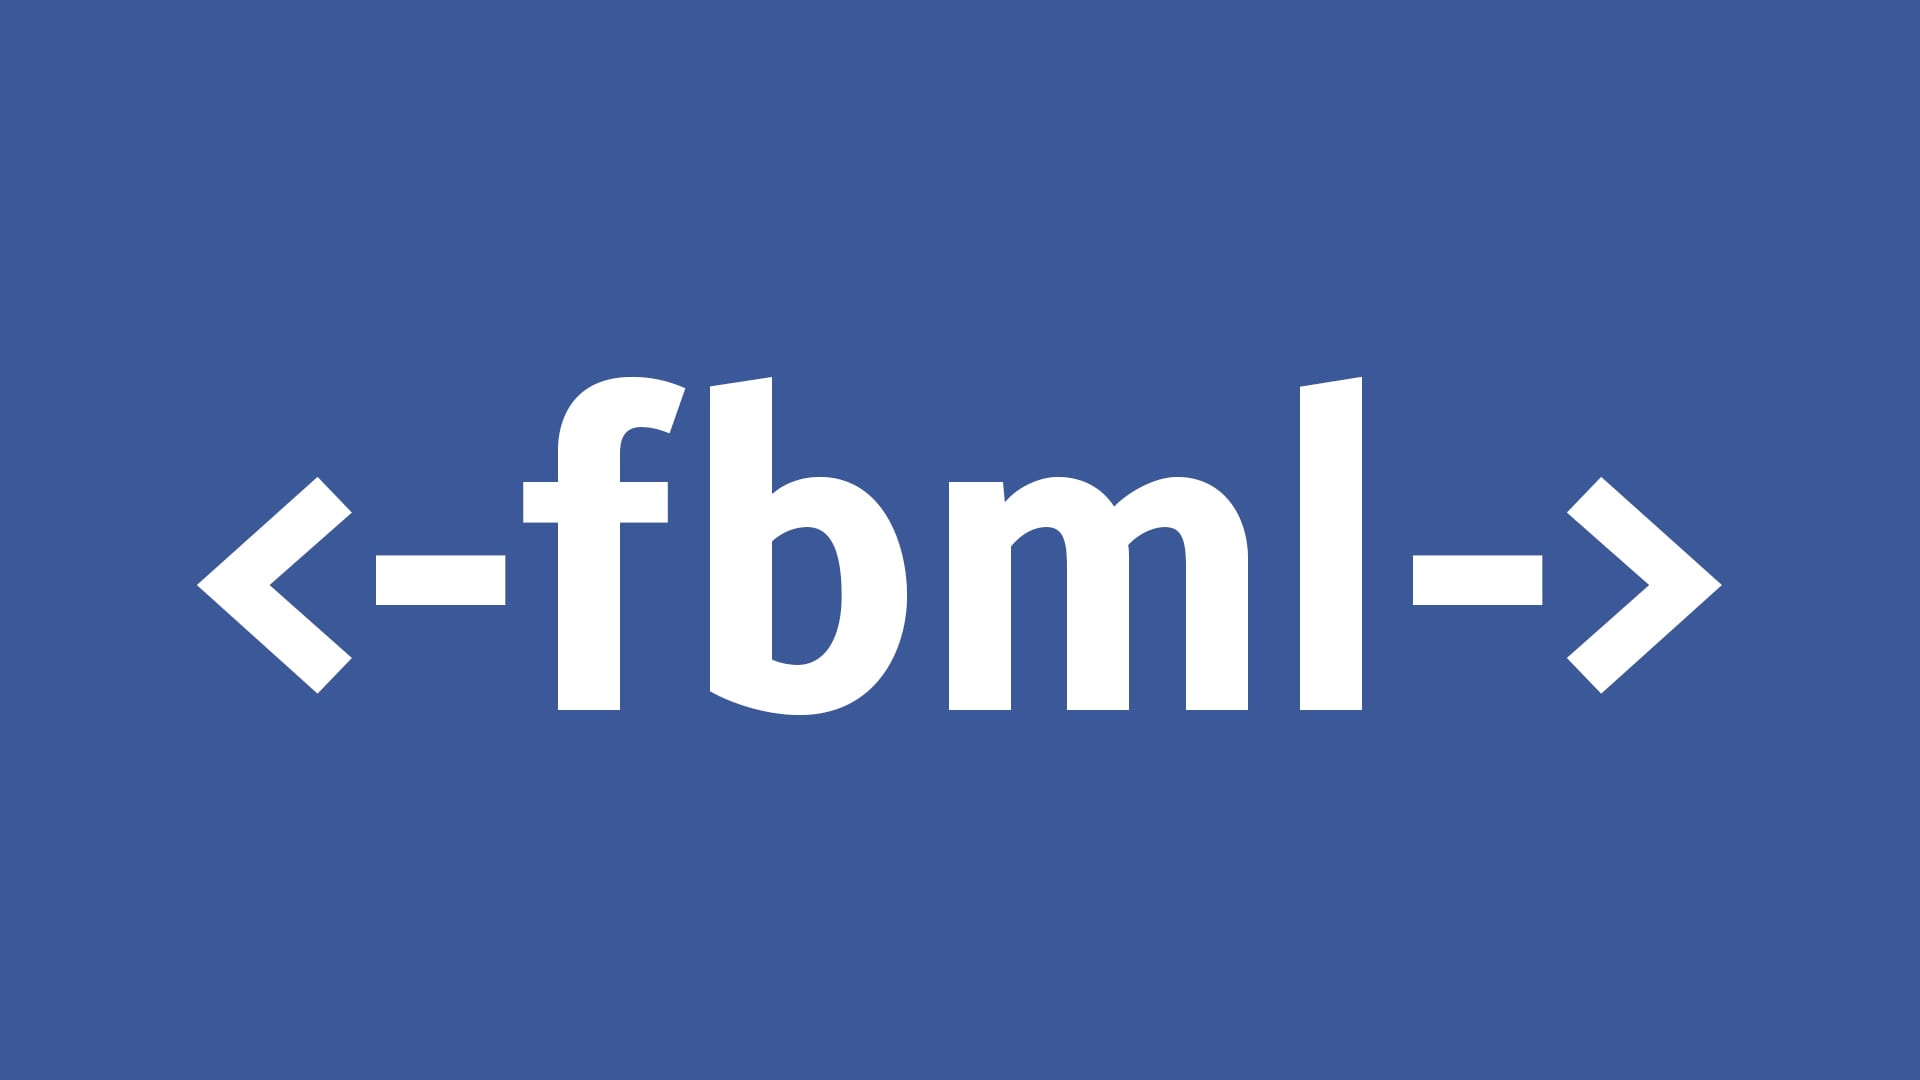 Using FBML to create custom Facebook pages